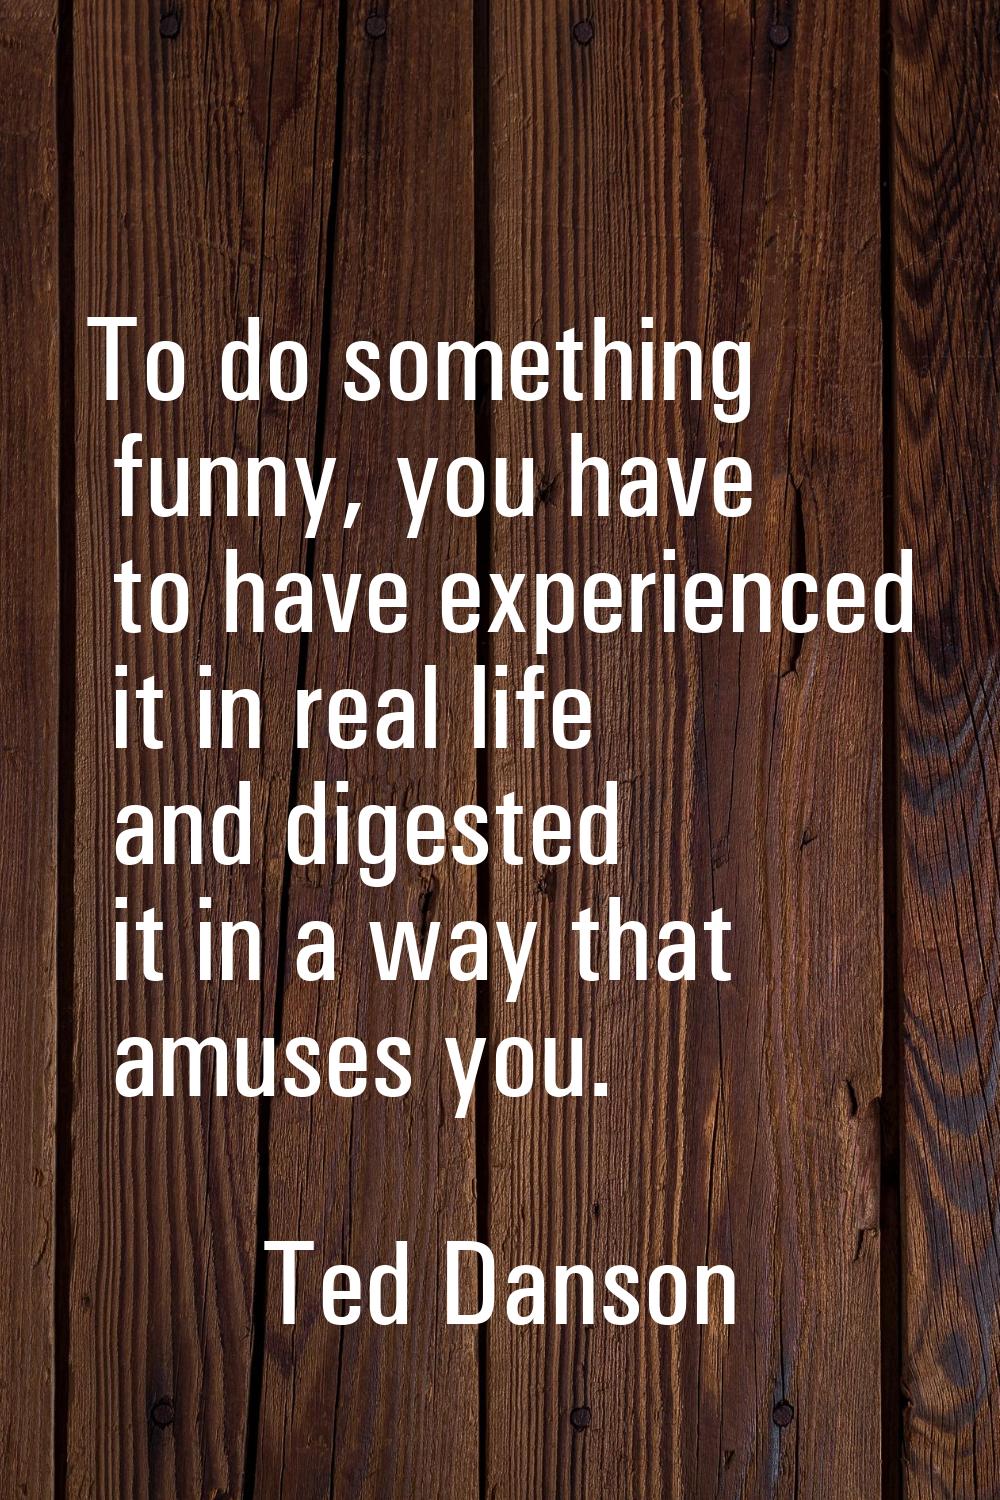 To do something funny, you have to have experienced it in real life and digested it in a way that a